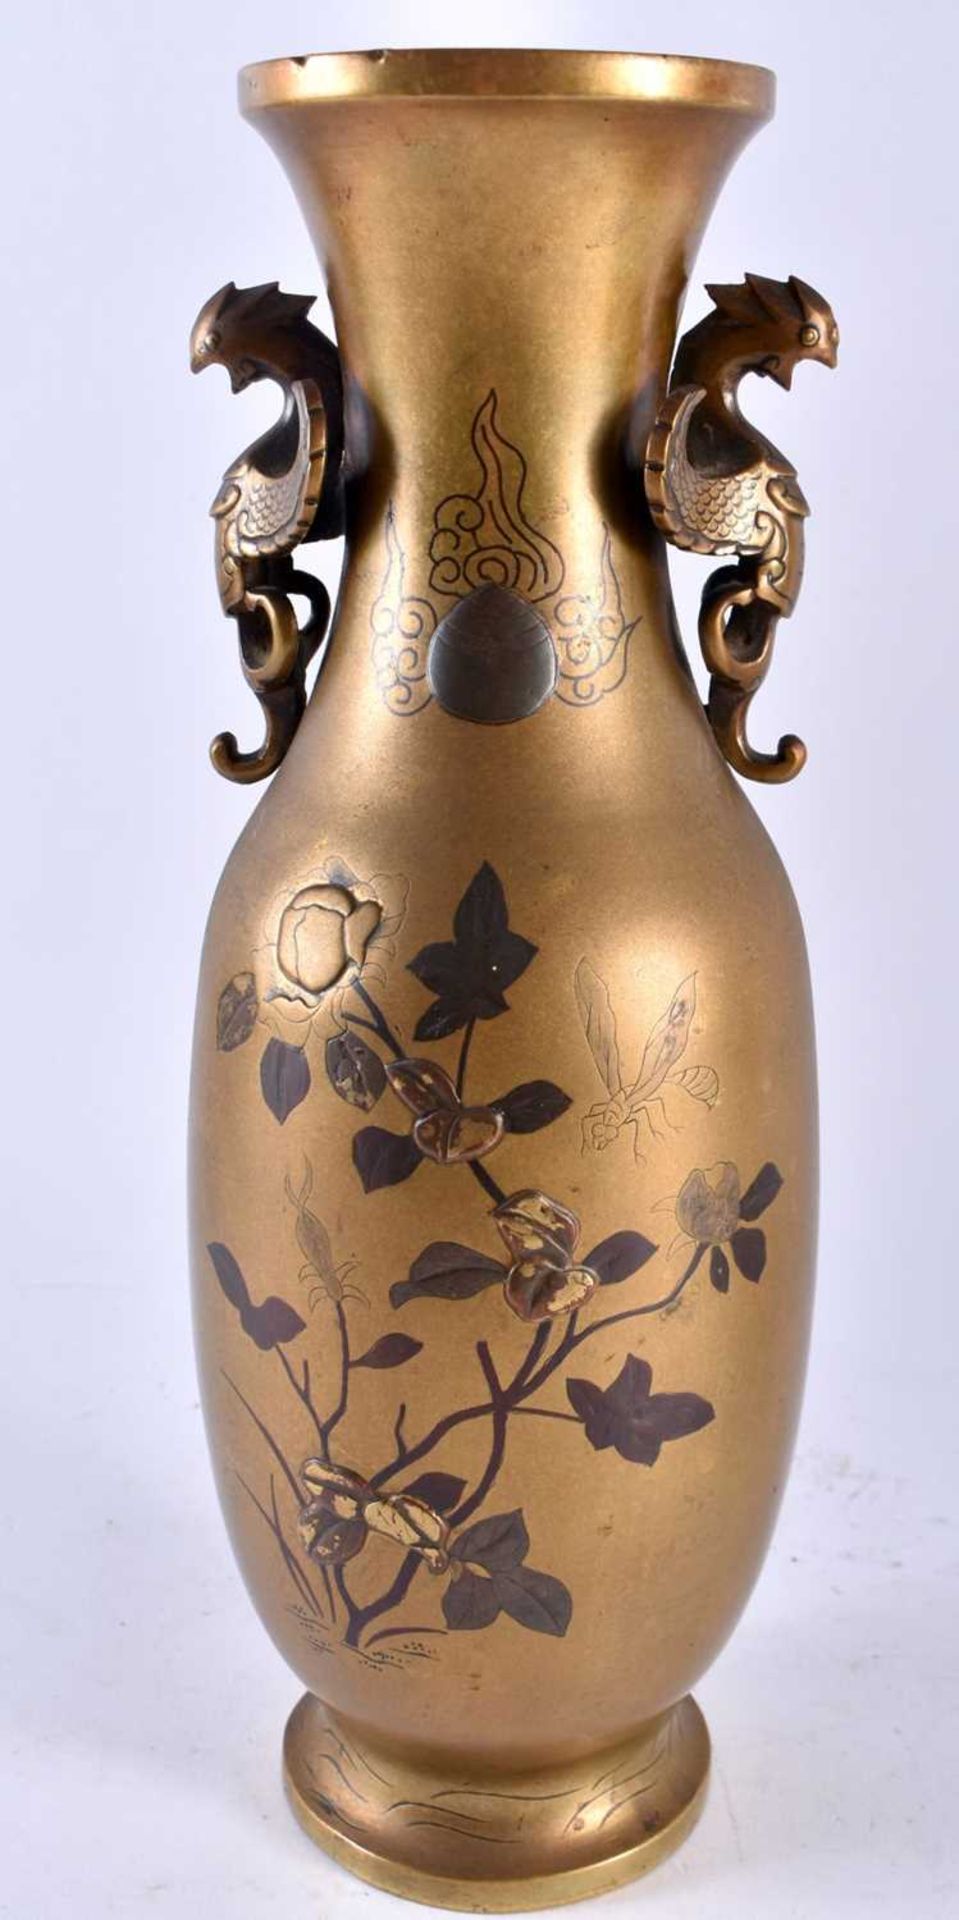 A 19TH CENTURY JAPANESE MEIJI PERIOD MIXED METAL BRONZE VASE decorated with insects and foliage. - Image 5 of 8